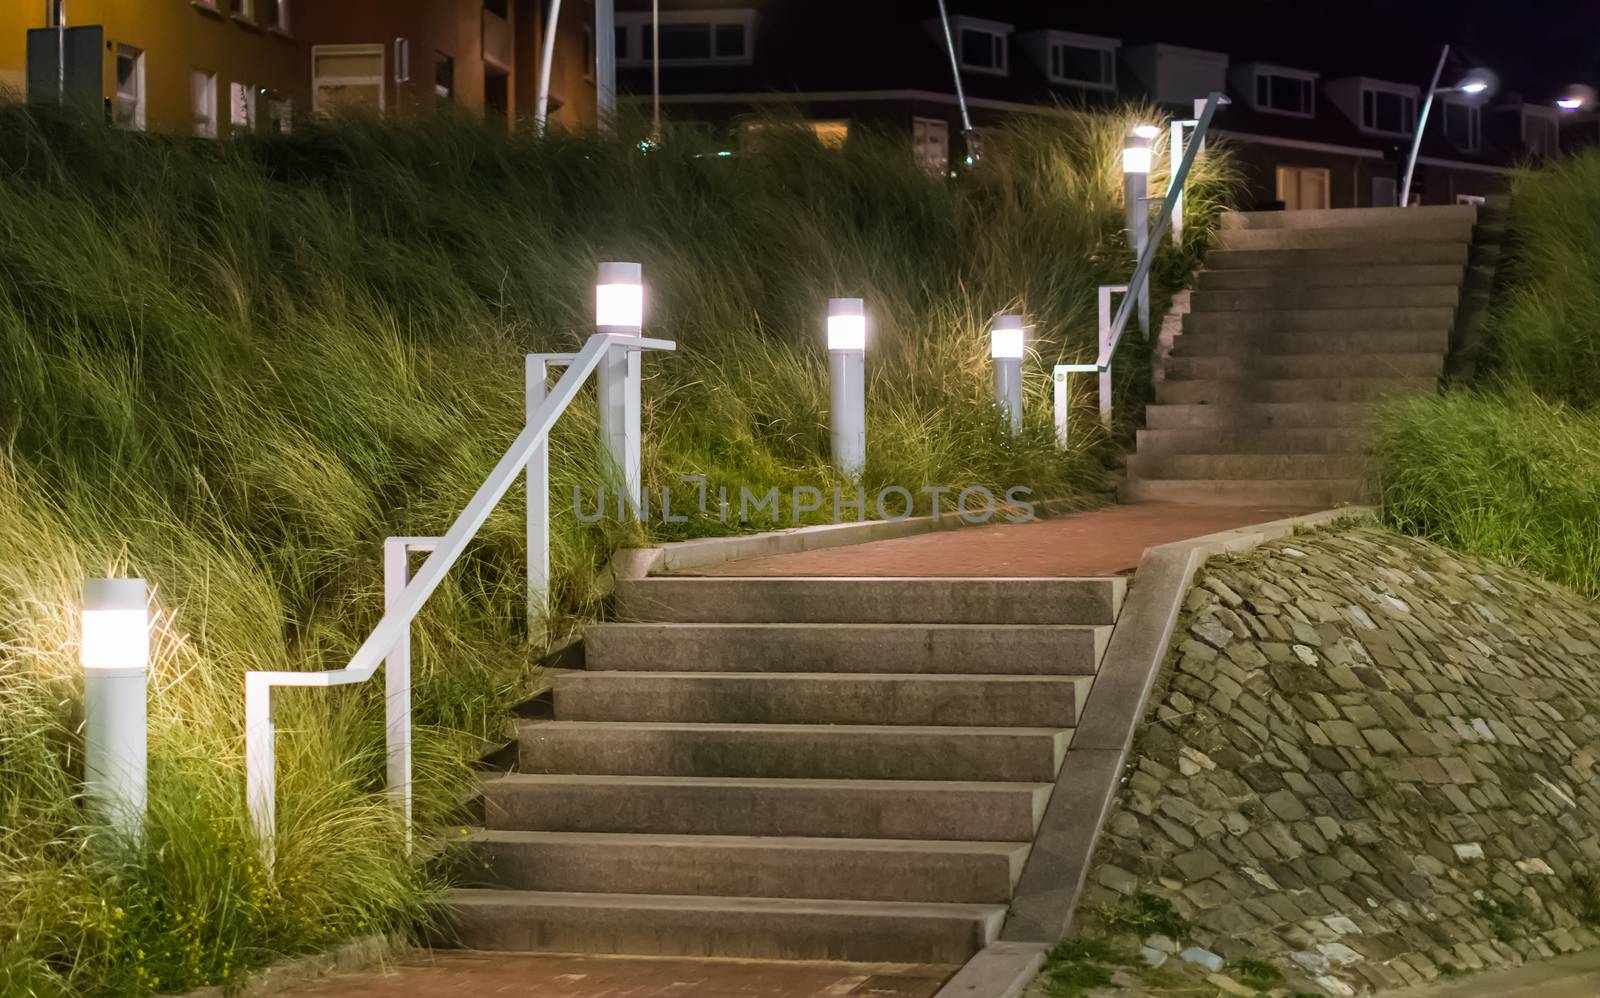 stone city staircase going up with light lanterns urban cityscape scenery of the streets at night